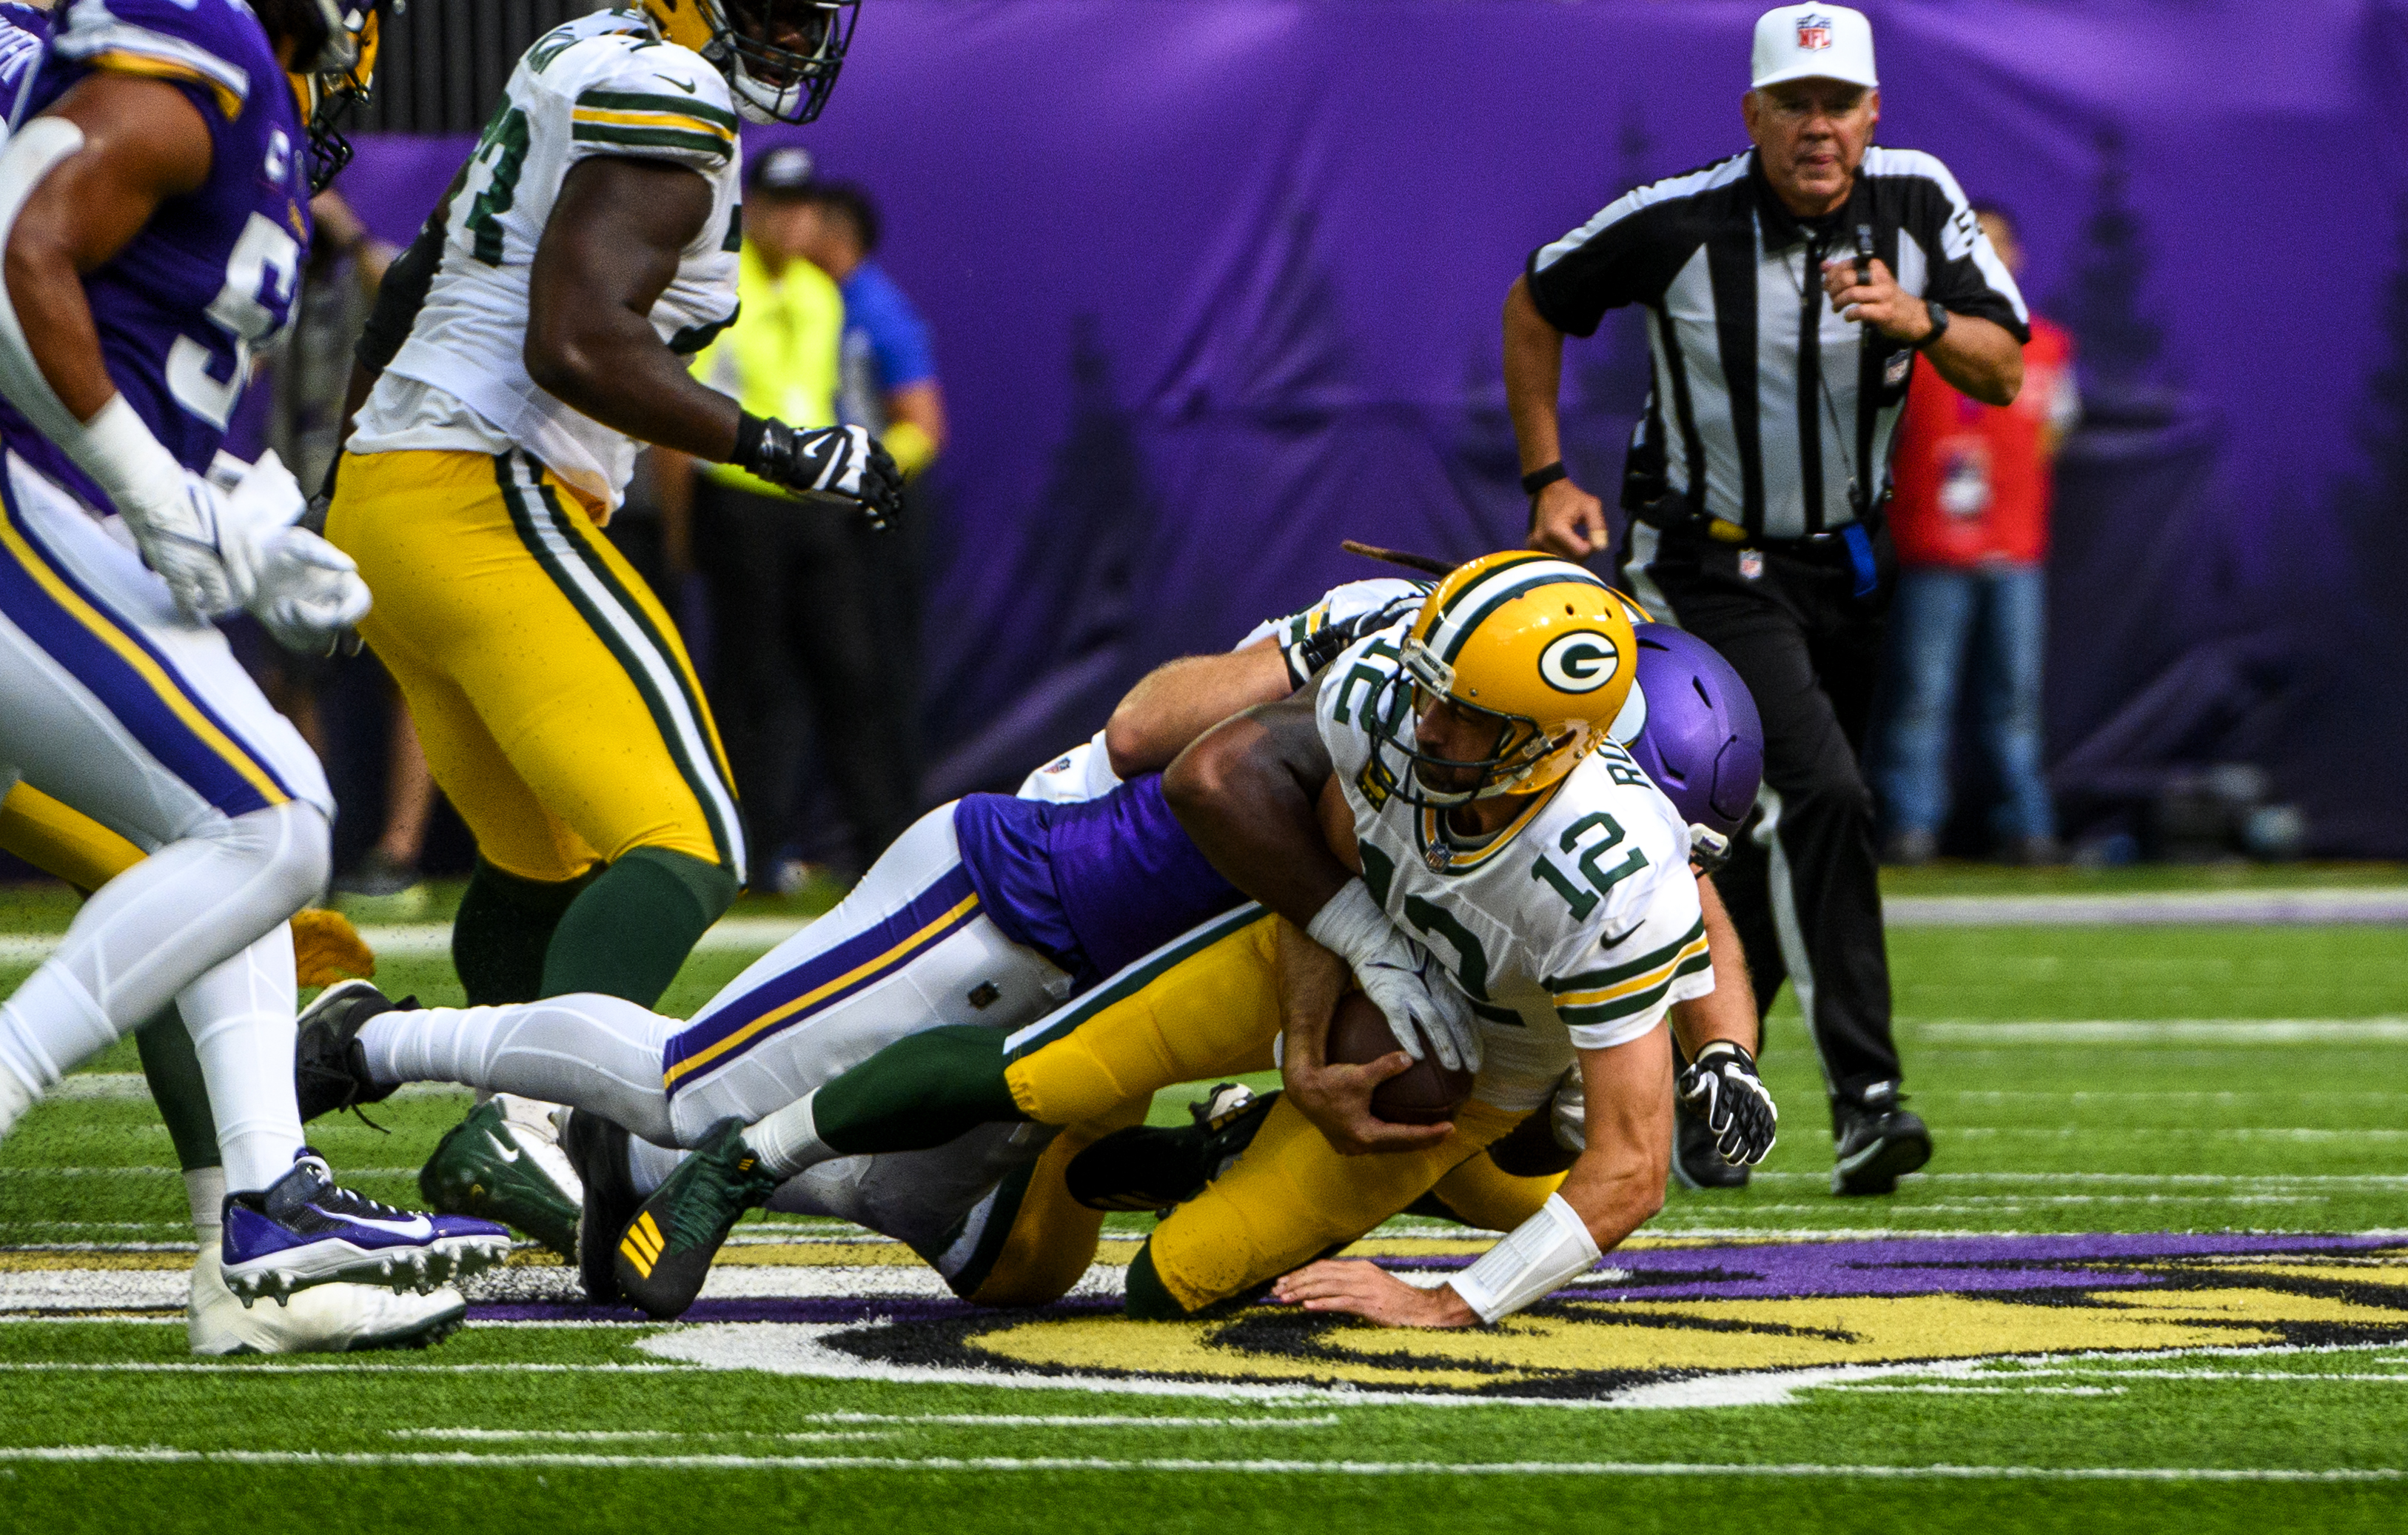 Aaron Rodgers #12 of the Green Bay Packers is sacked by Za’Darius Smith #55 of the Minnesota Vikings in the first quarter of the game at U.S. Bank Stadium on September 11, 2022 in Minneapolis, Minnesota.